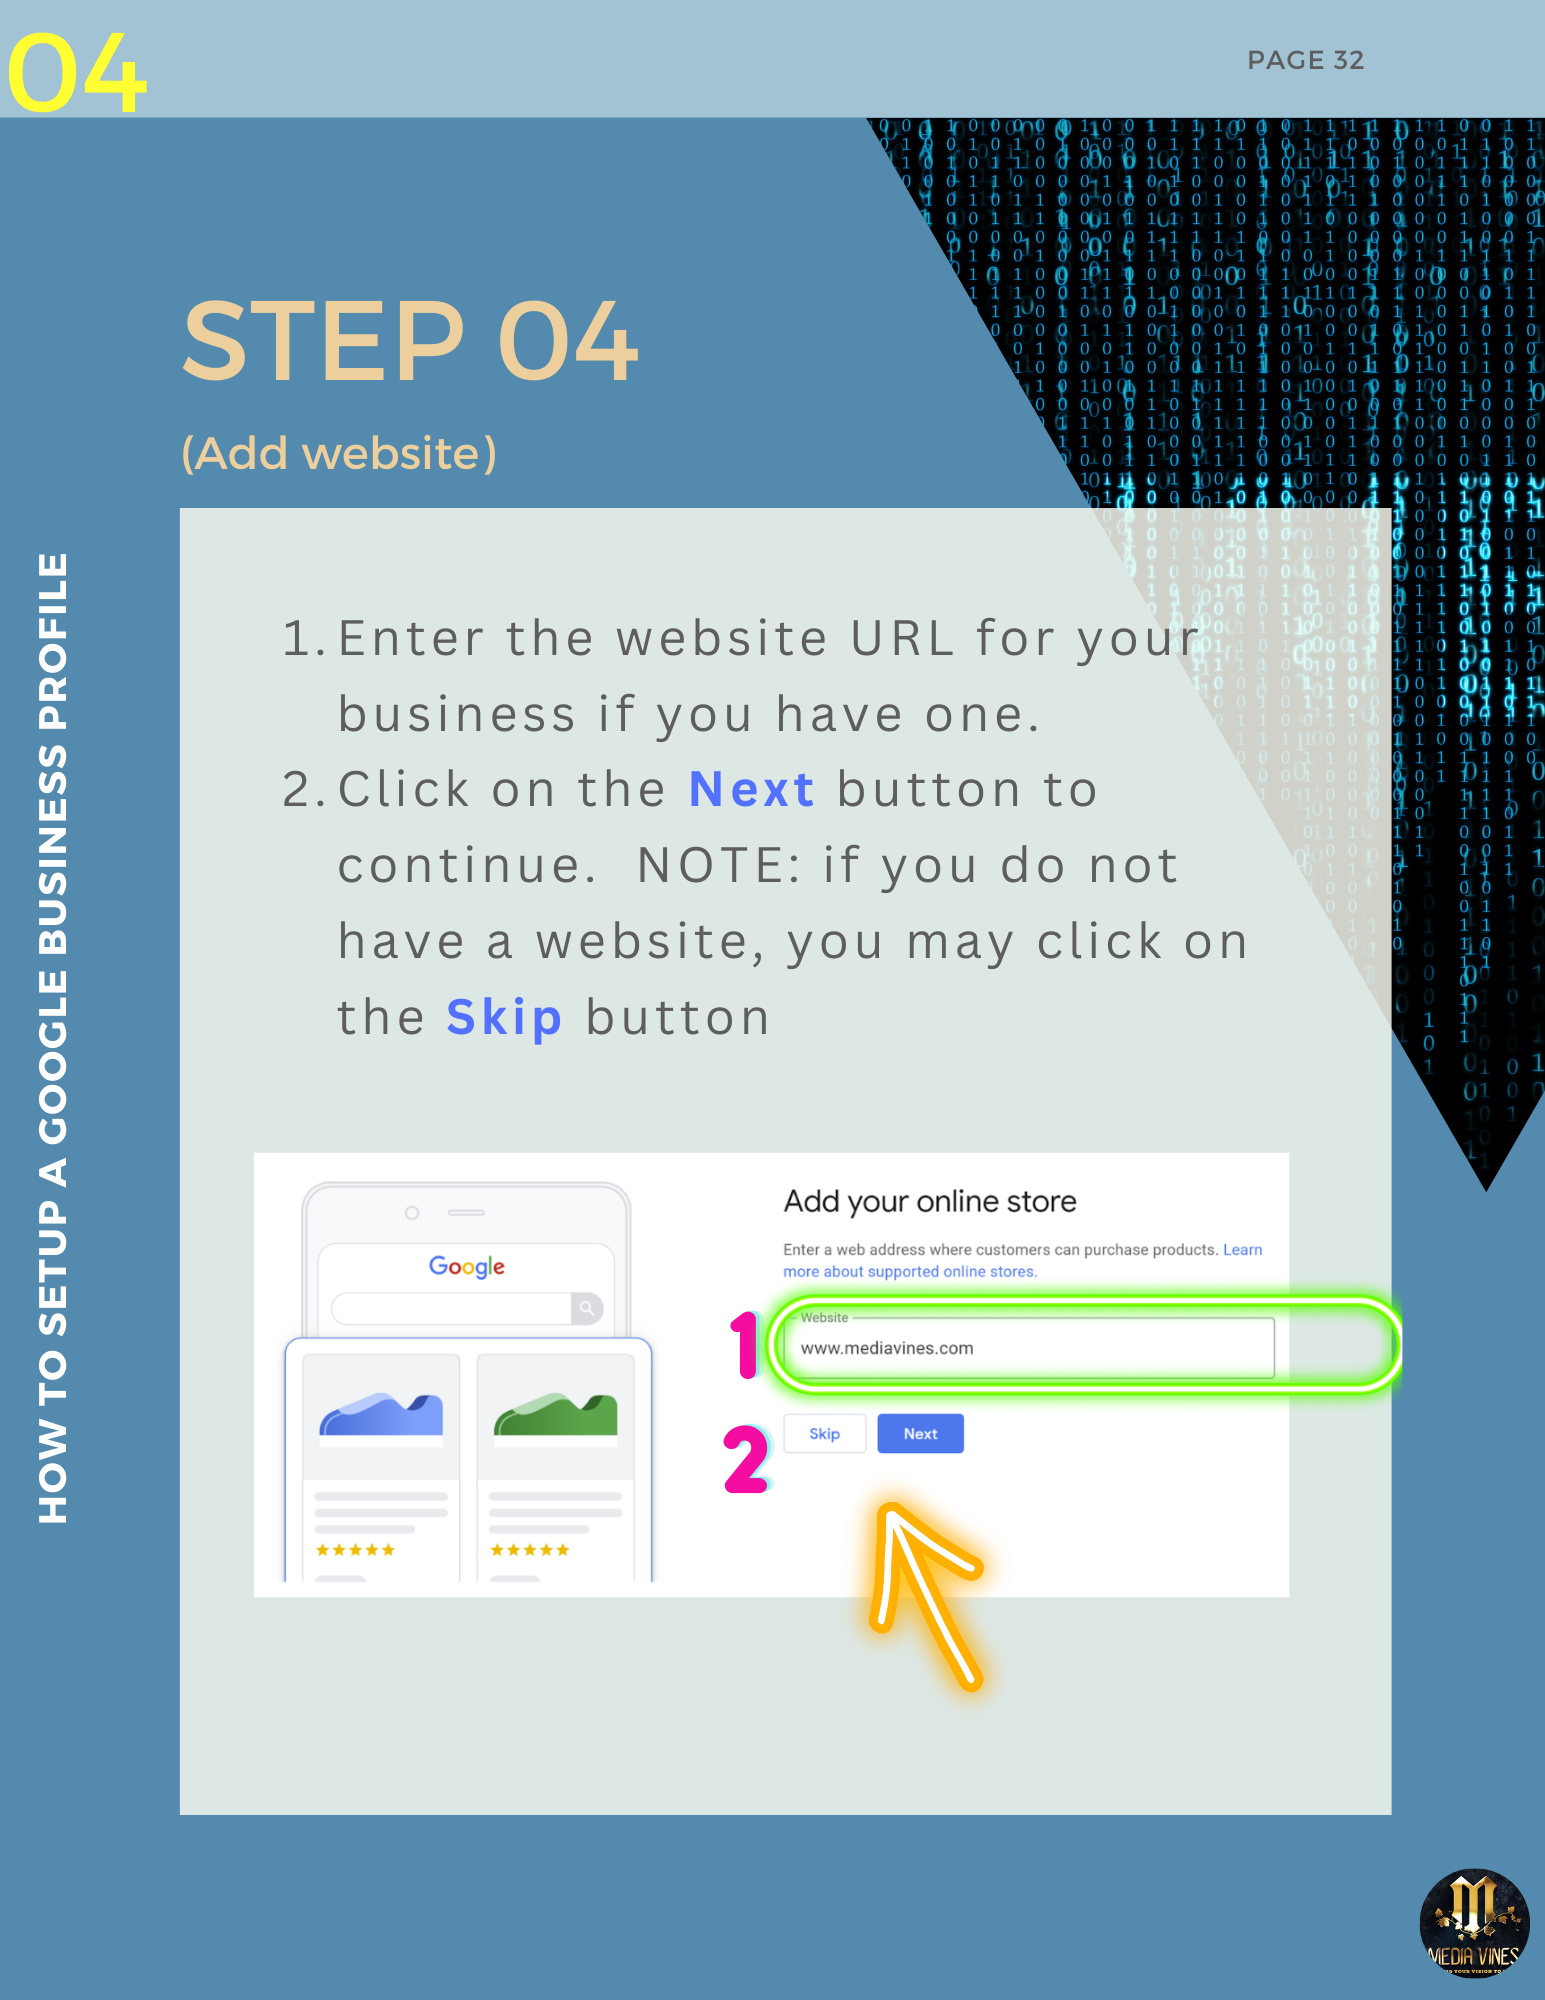 Add Website step - Guide to Google Business Profile (GBP) - a DIY ebook for small business to get listed on GBP by Media Vines Corp of Kihei, HI